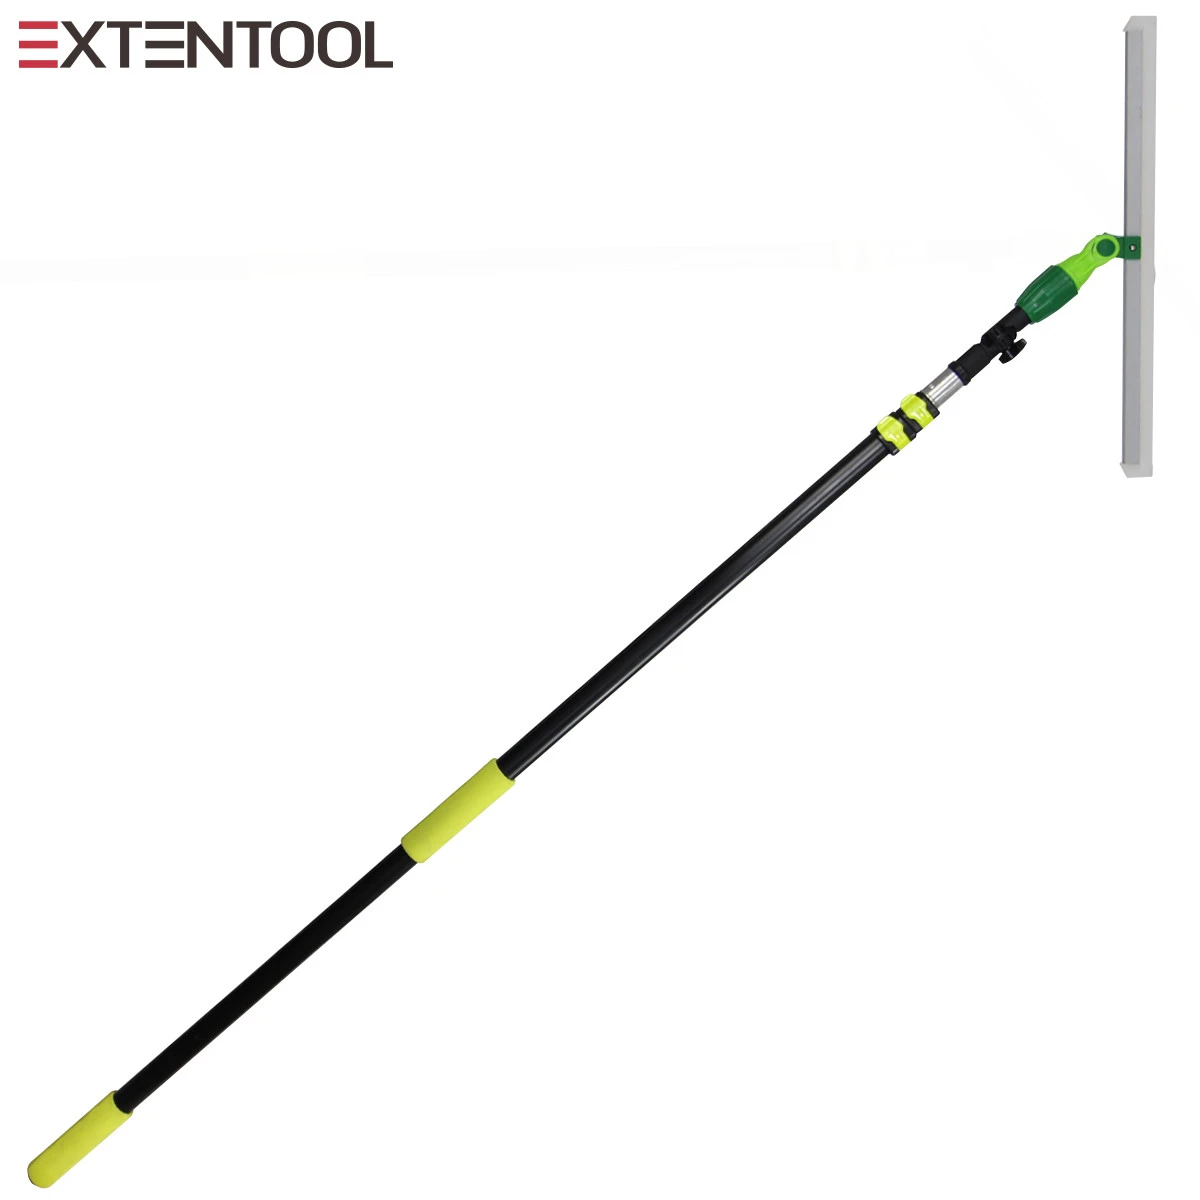 Extentool Custom-length Long Handle Telescopic Pole Window Cleaning Kit Cleaner Wiper Cleaning Squeegee